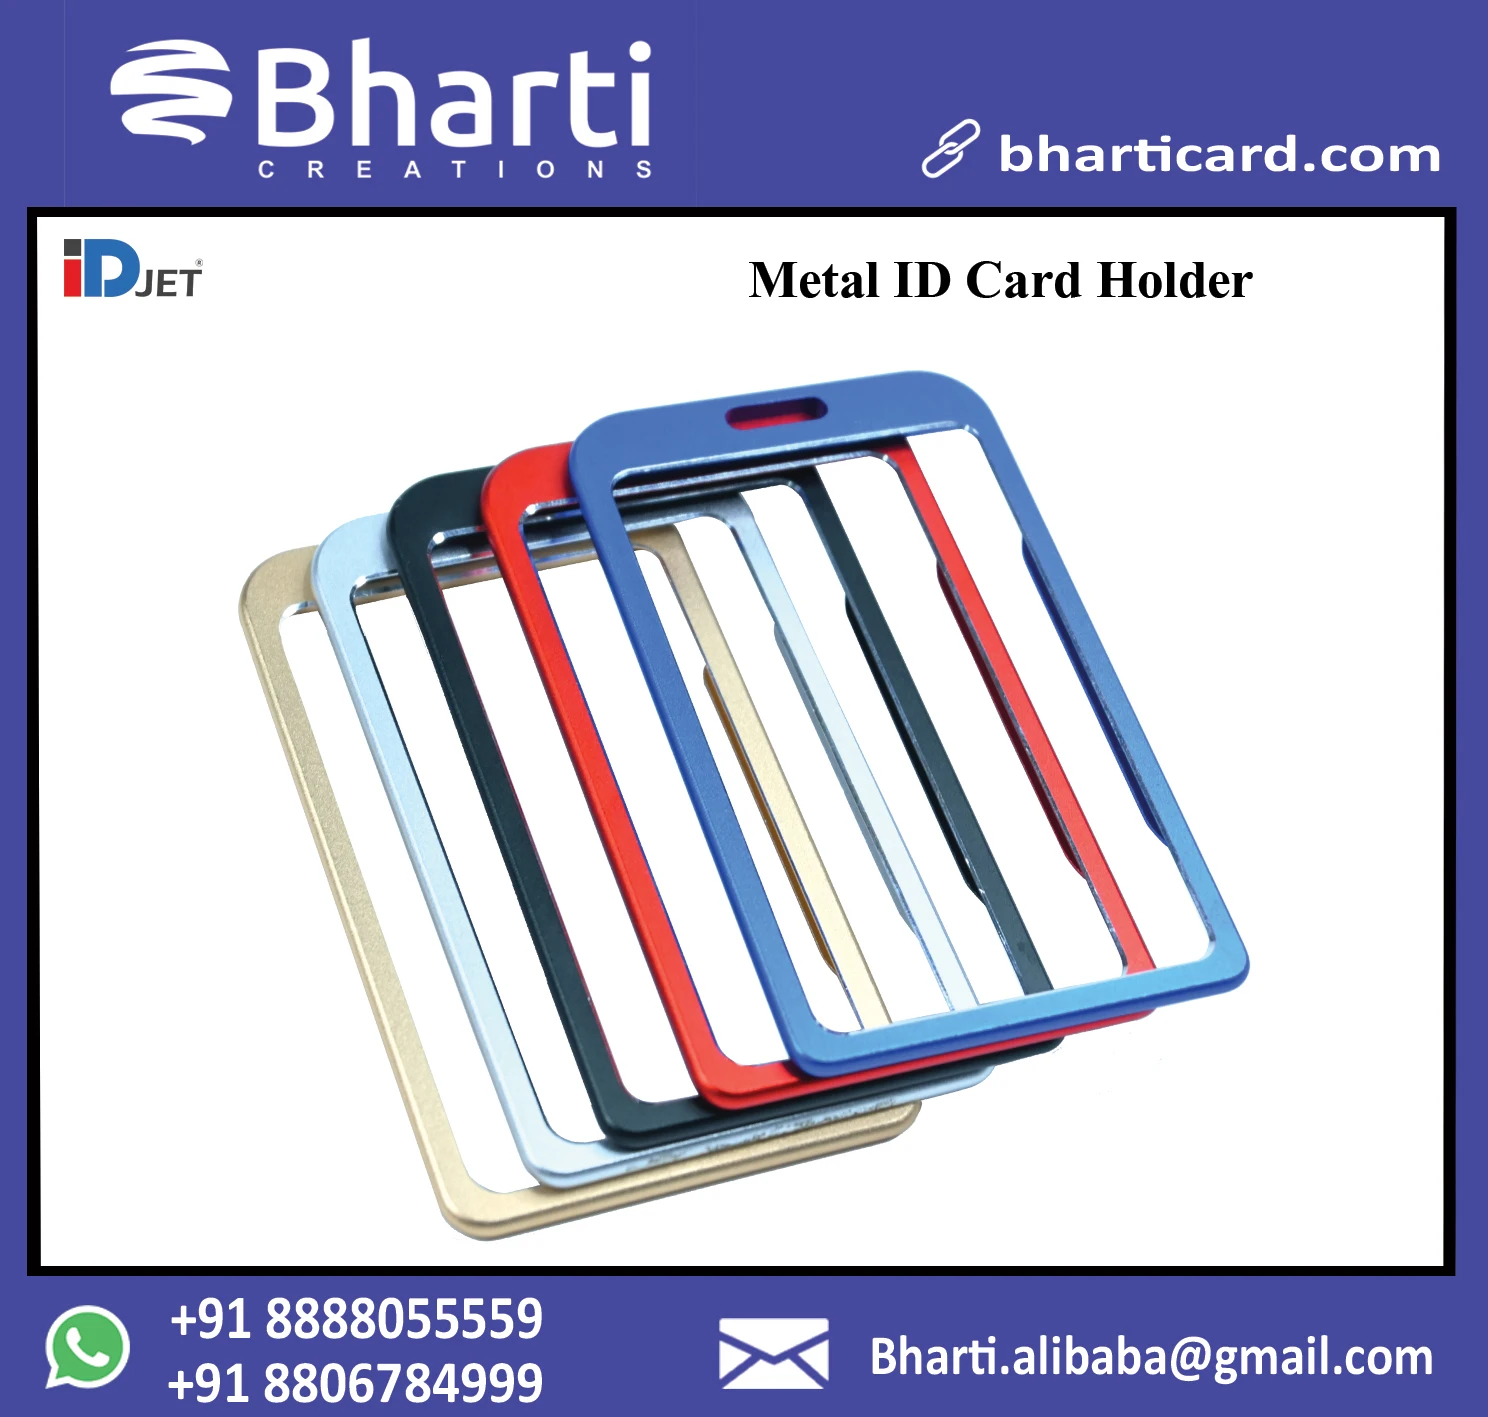 ProSelect ZW228 03 Metal Card-Durable Holders Designed to Conveniently Display ID Cards on Any Standard Cage 3 x 5 